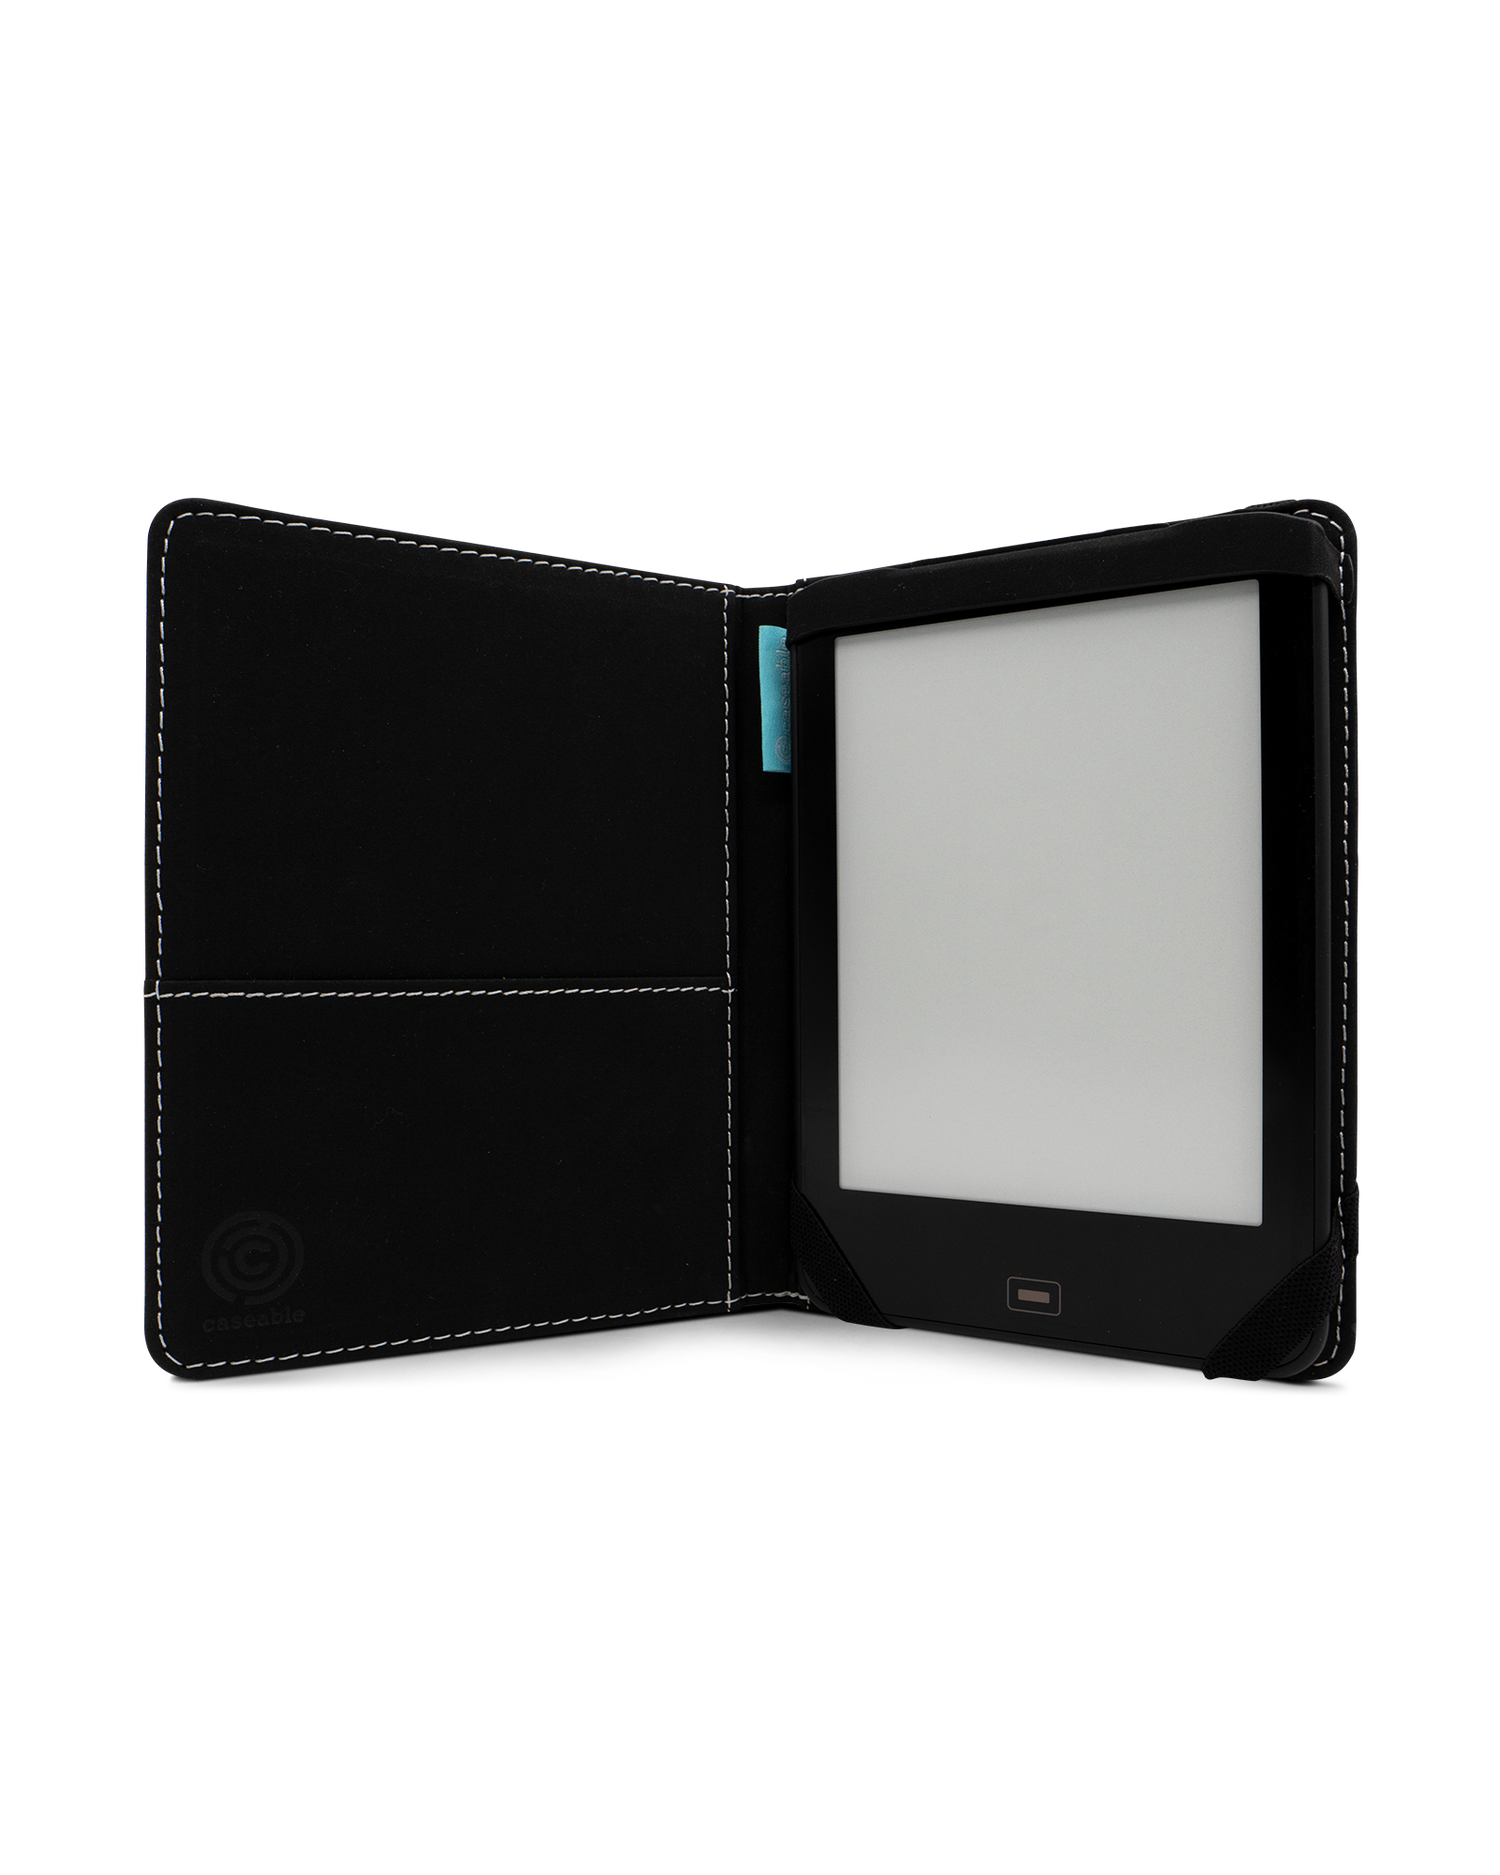 TURQUOISE eReader Case for tolino vision 1 to 4 HD: Opened interior view